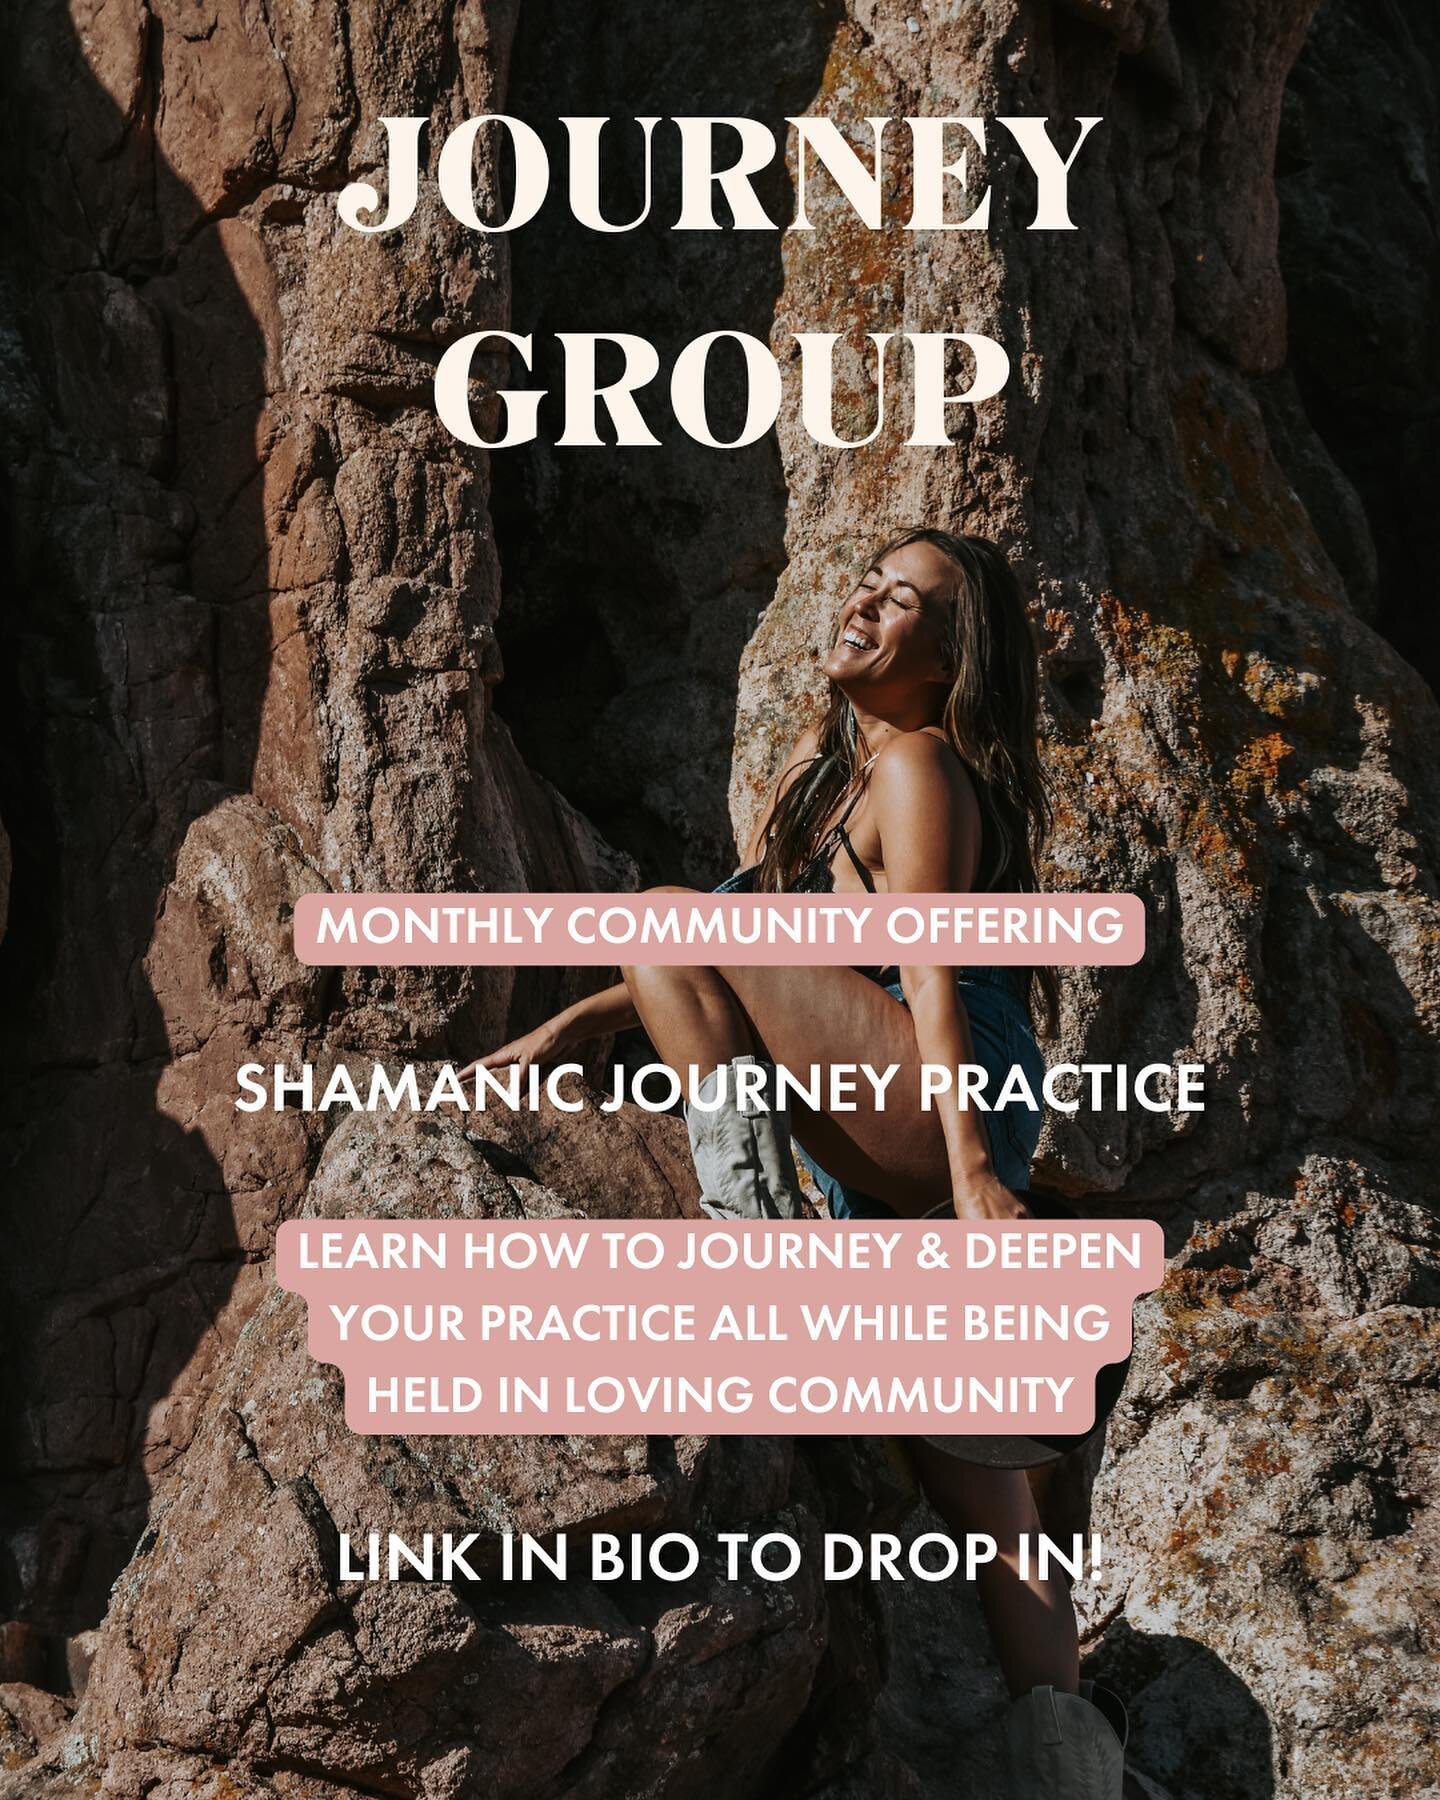 🪐 Let's Journey 🪐⁠
⁠
𝗢𝘂𝗿 𝗻𝗲𝘅𝘁 community 𝗷𝗼𝘂𝗿𝗻𝗲𝘆 group is THIS 𝗪𝗲𝗱𝗻𝗲𝘀𝗱𝗮𝘆, 𝗔𝘂𝗴𝘂𝘀𝘁 𝟮𝟰𝘁𝗵 𝗮𝘁 𝟵 𝗽𝗺 𝗘𝗦𝗧 - 𝗹𝗶𝗻𝗸 𝗶𝗻 𝗯𝗶𝗼 𝘁𝗼 𝘀𝗶𝗴𝗻 𝘂𝗽! Excited to have you join us 🌀⁠
⁠
Where we're going takes deep comm